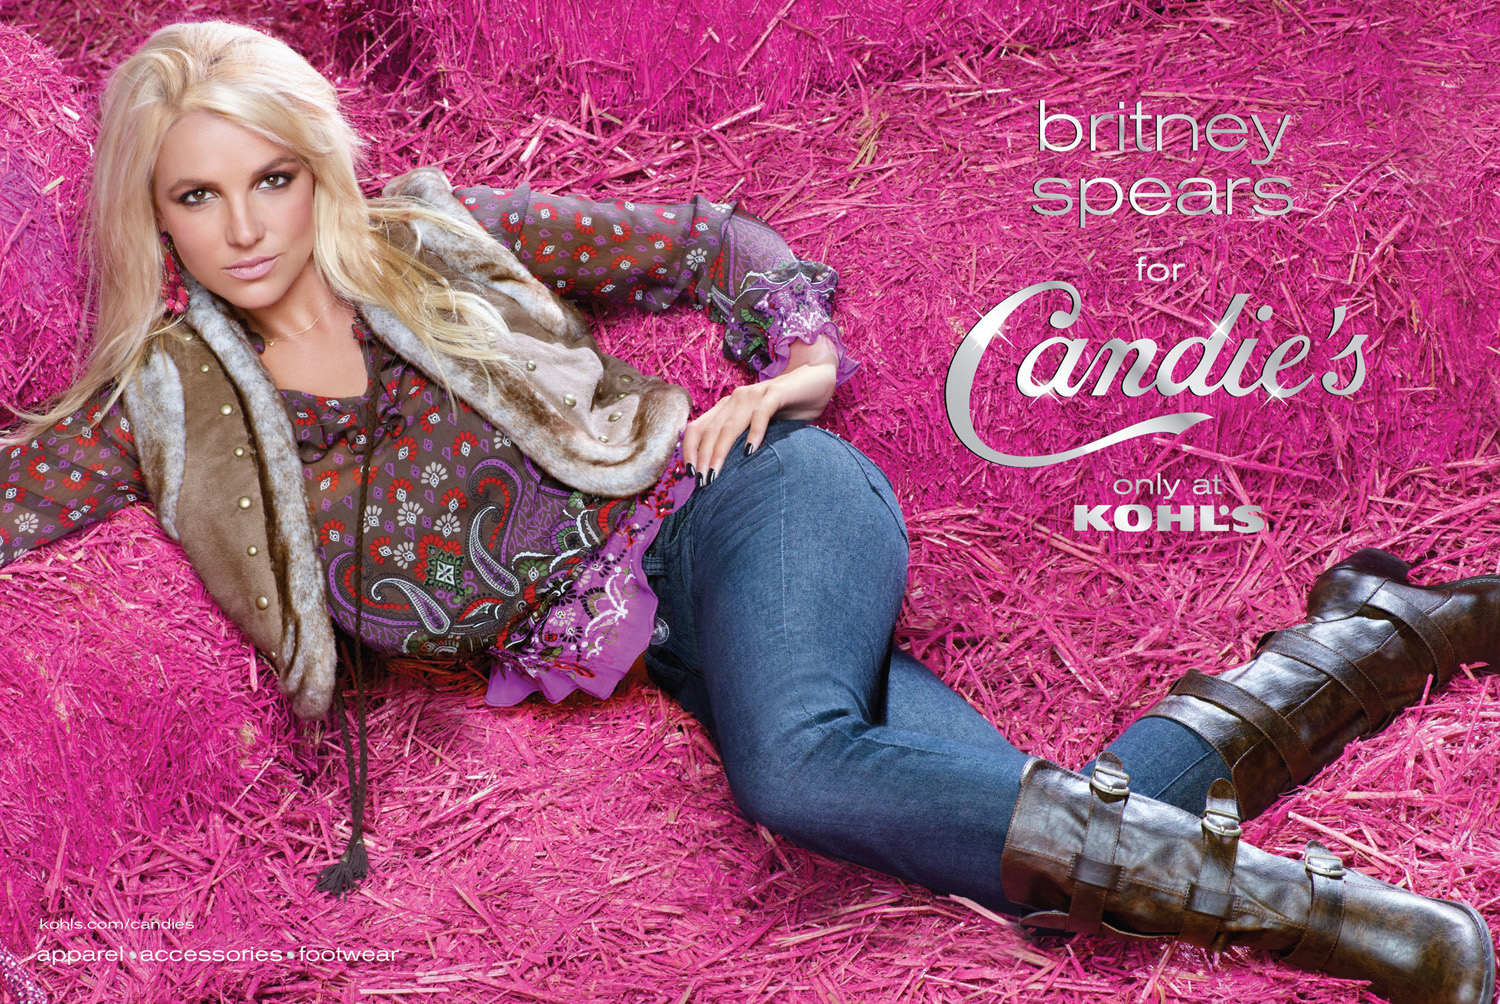 Britney Spears is Still the Face of Candie’s